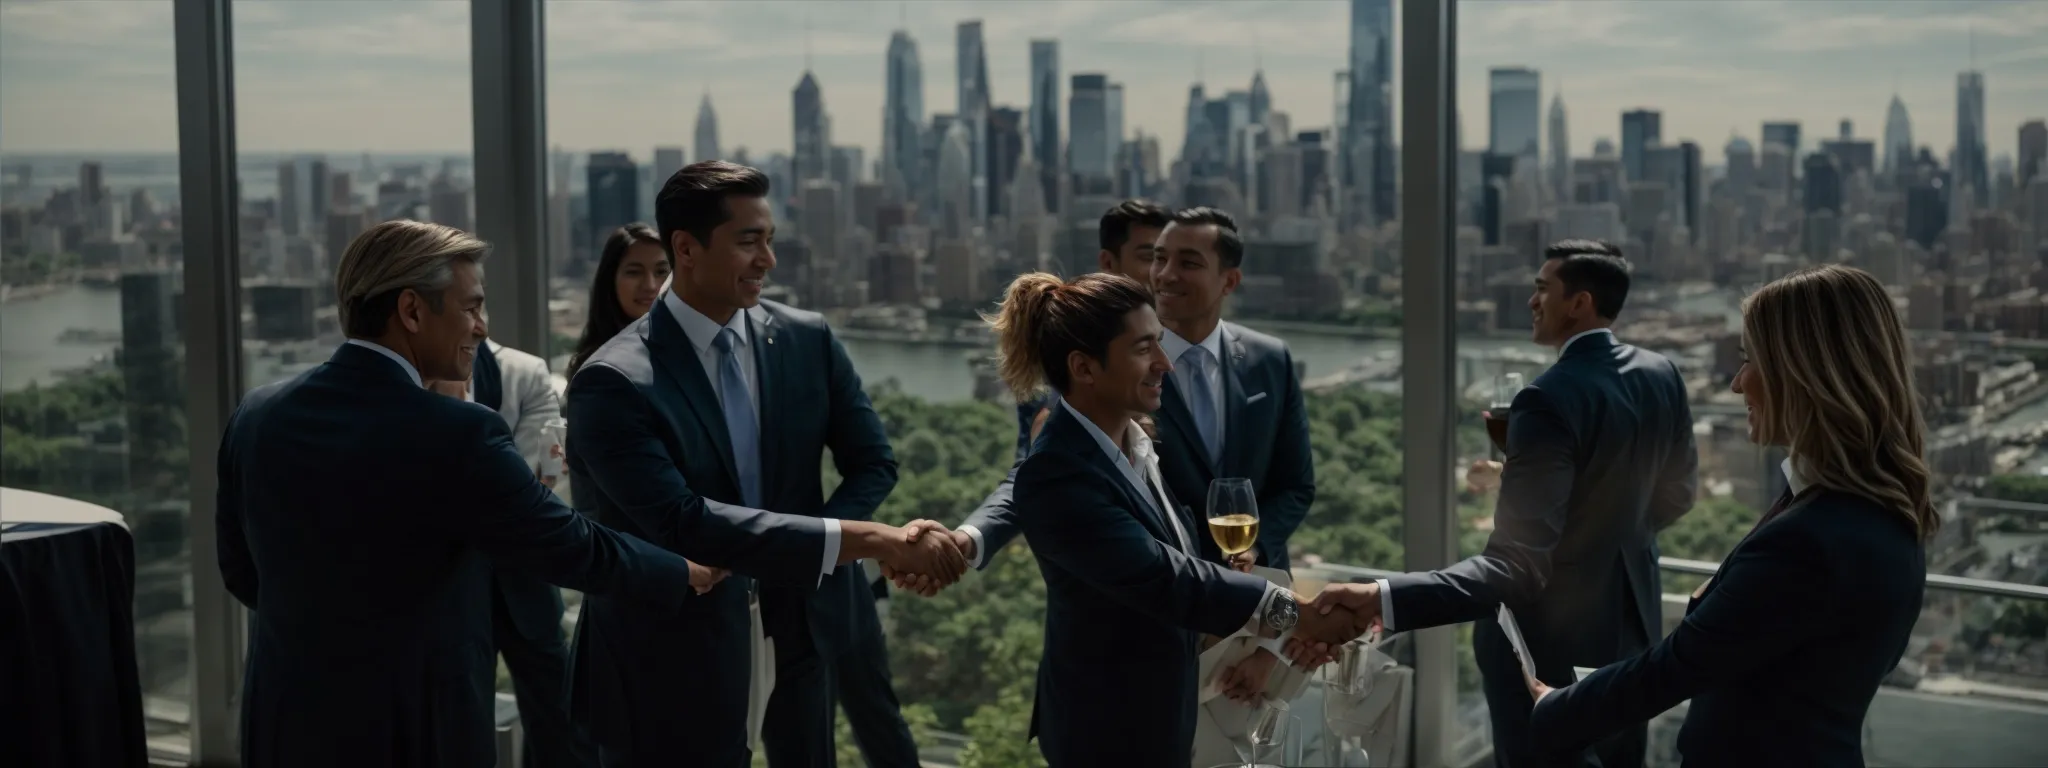 business professionals shake hands at a networking event against the backdrop of the new jersey skyline.